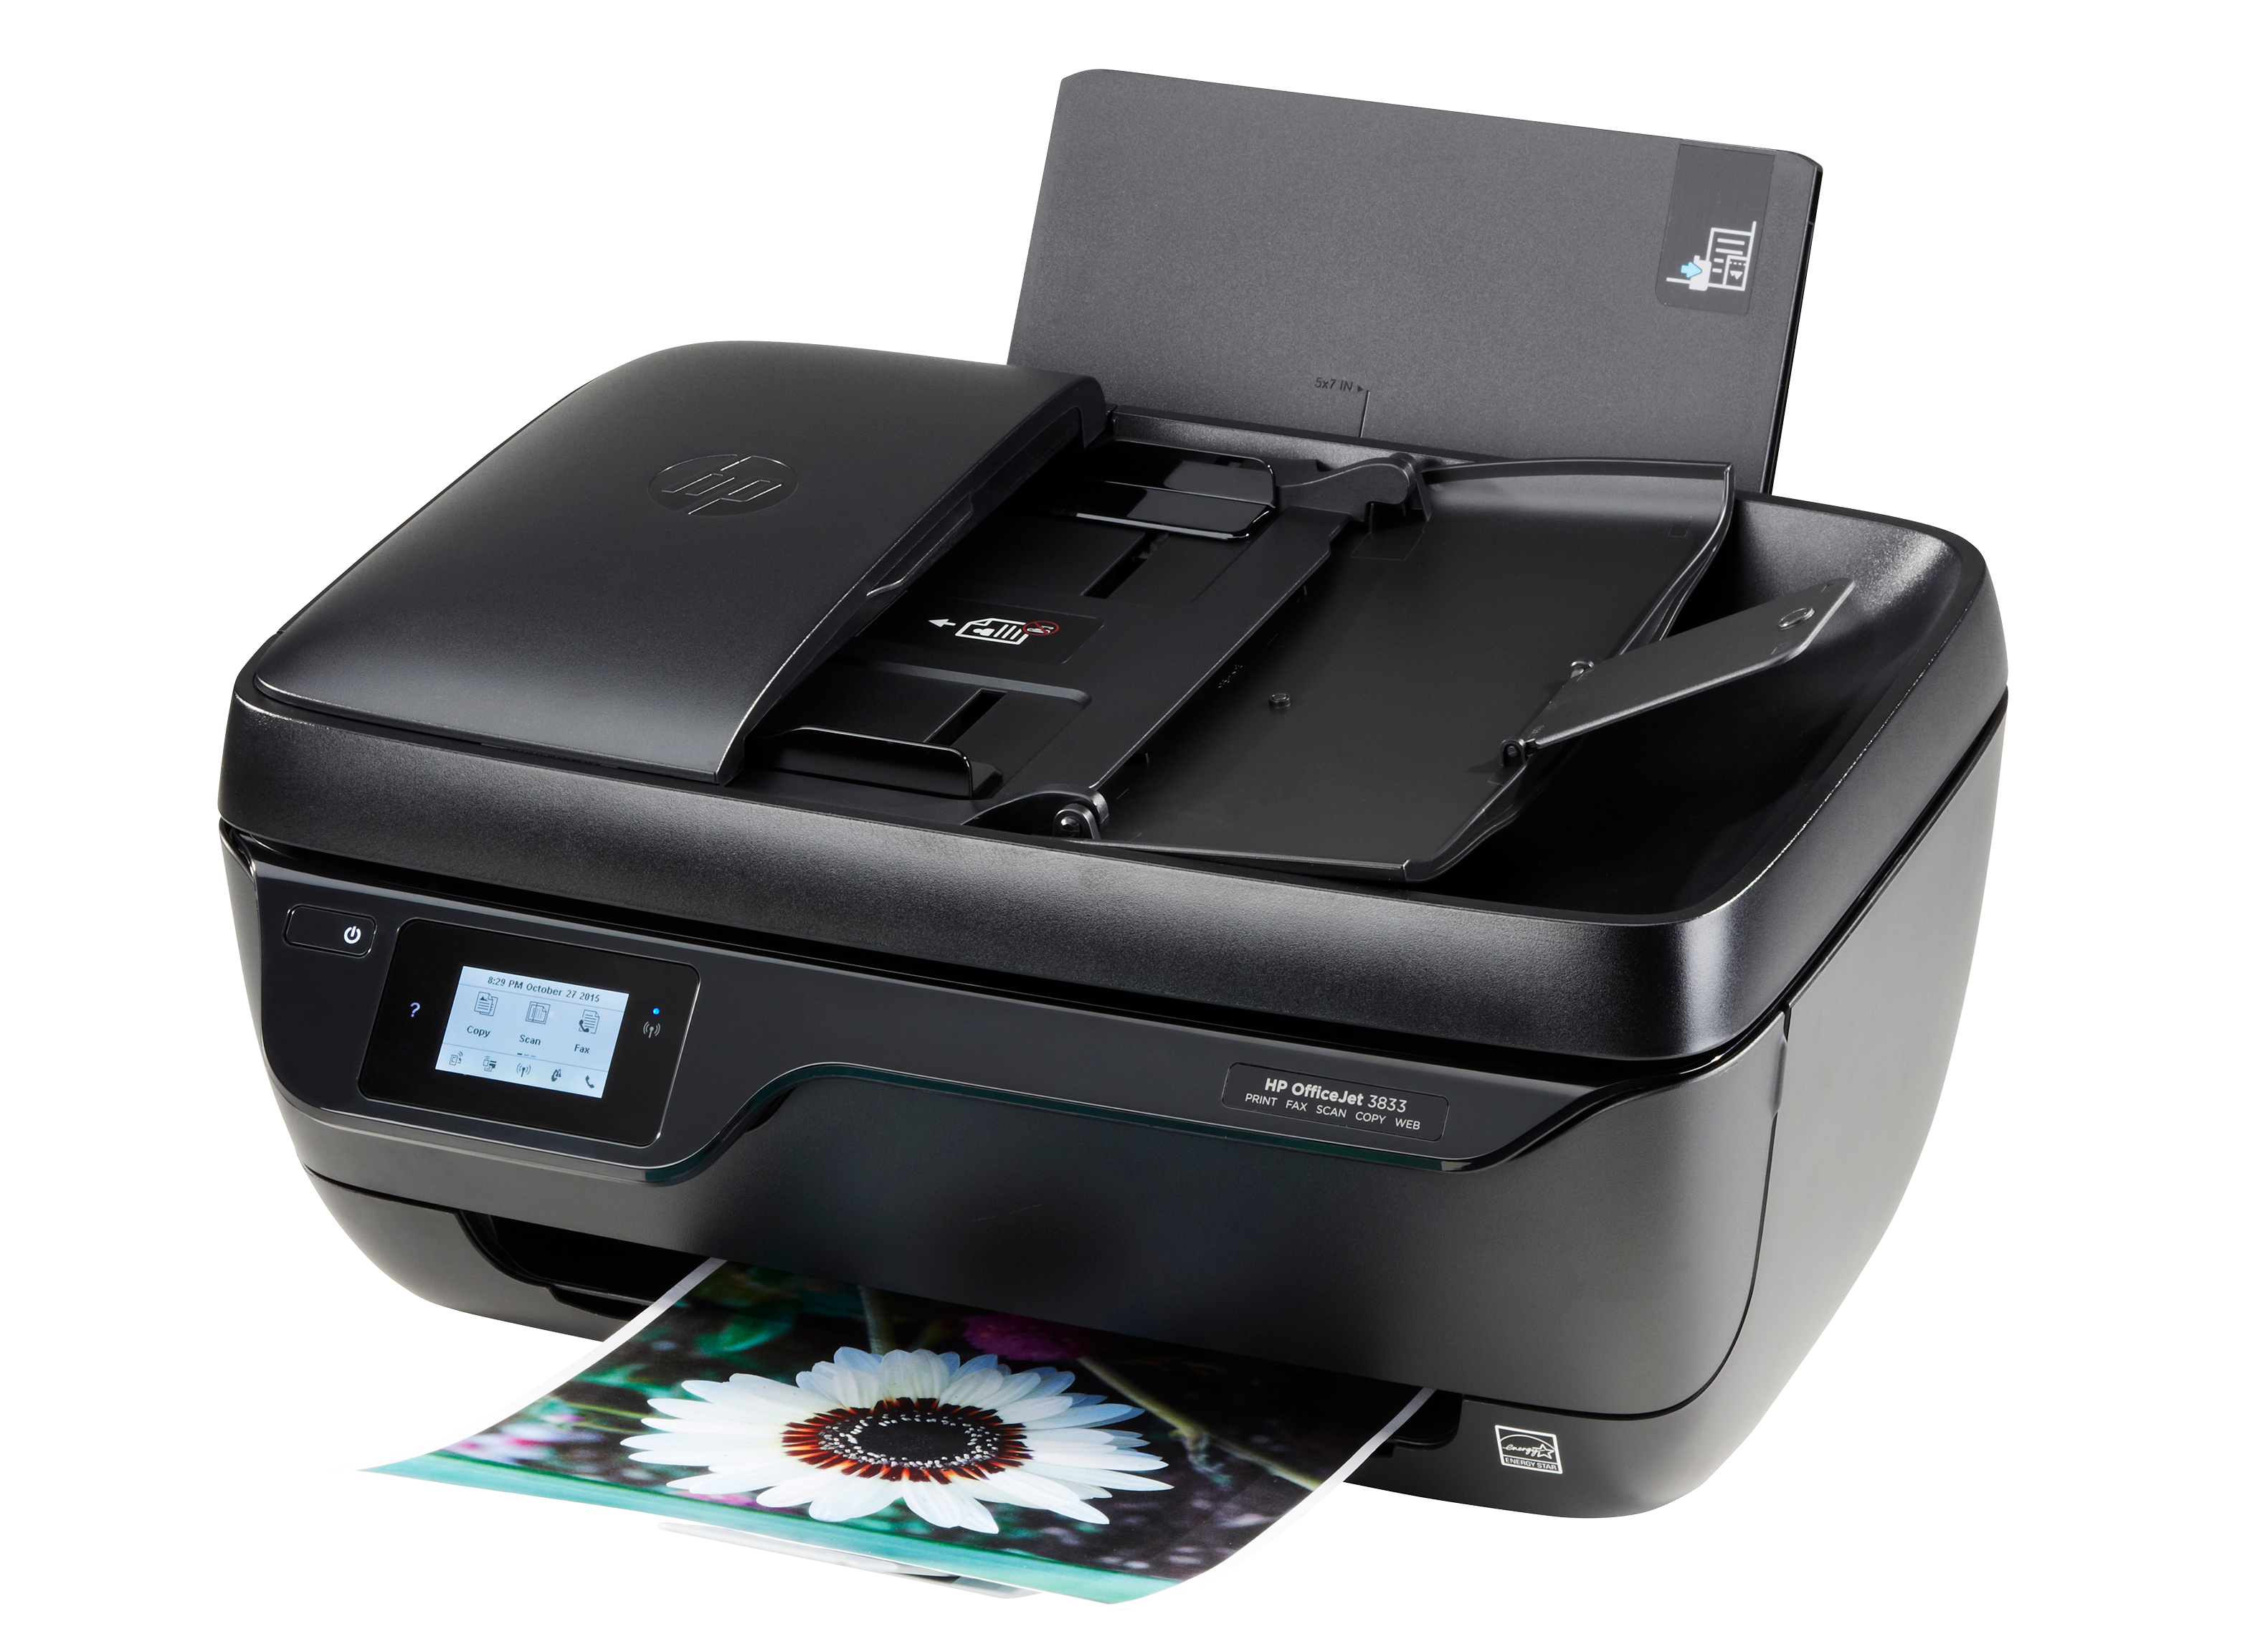 Officejet 3833 Printer Review - Consumer Reports